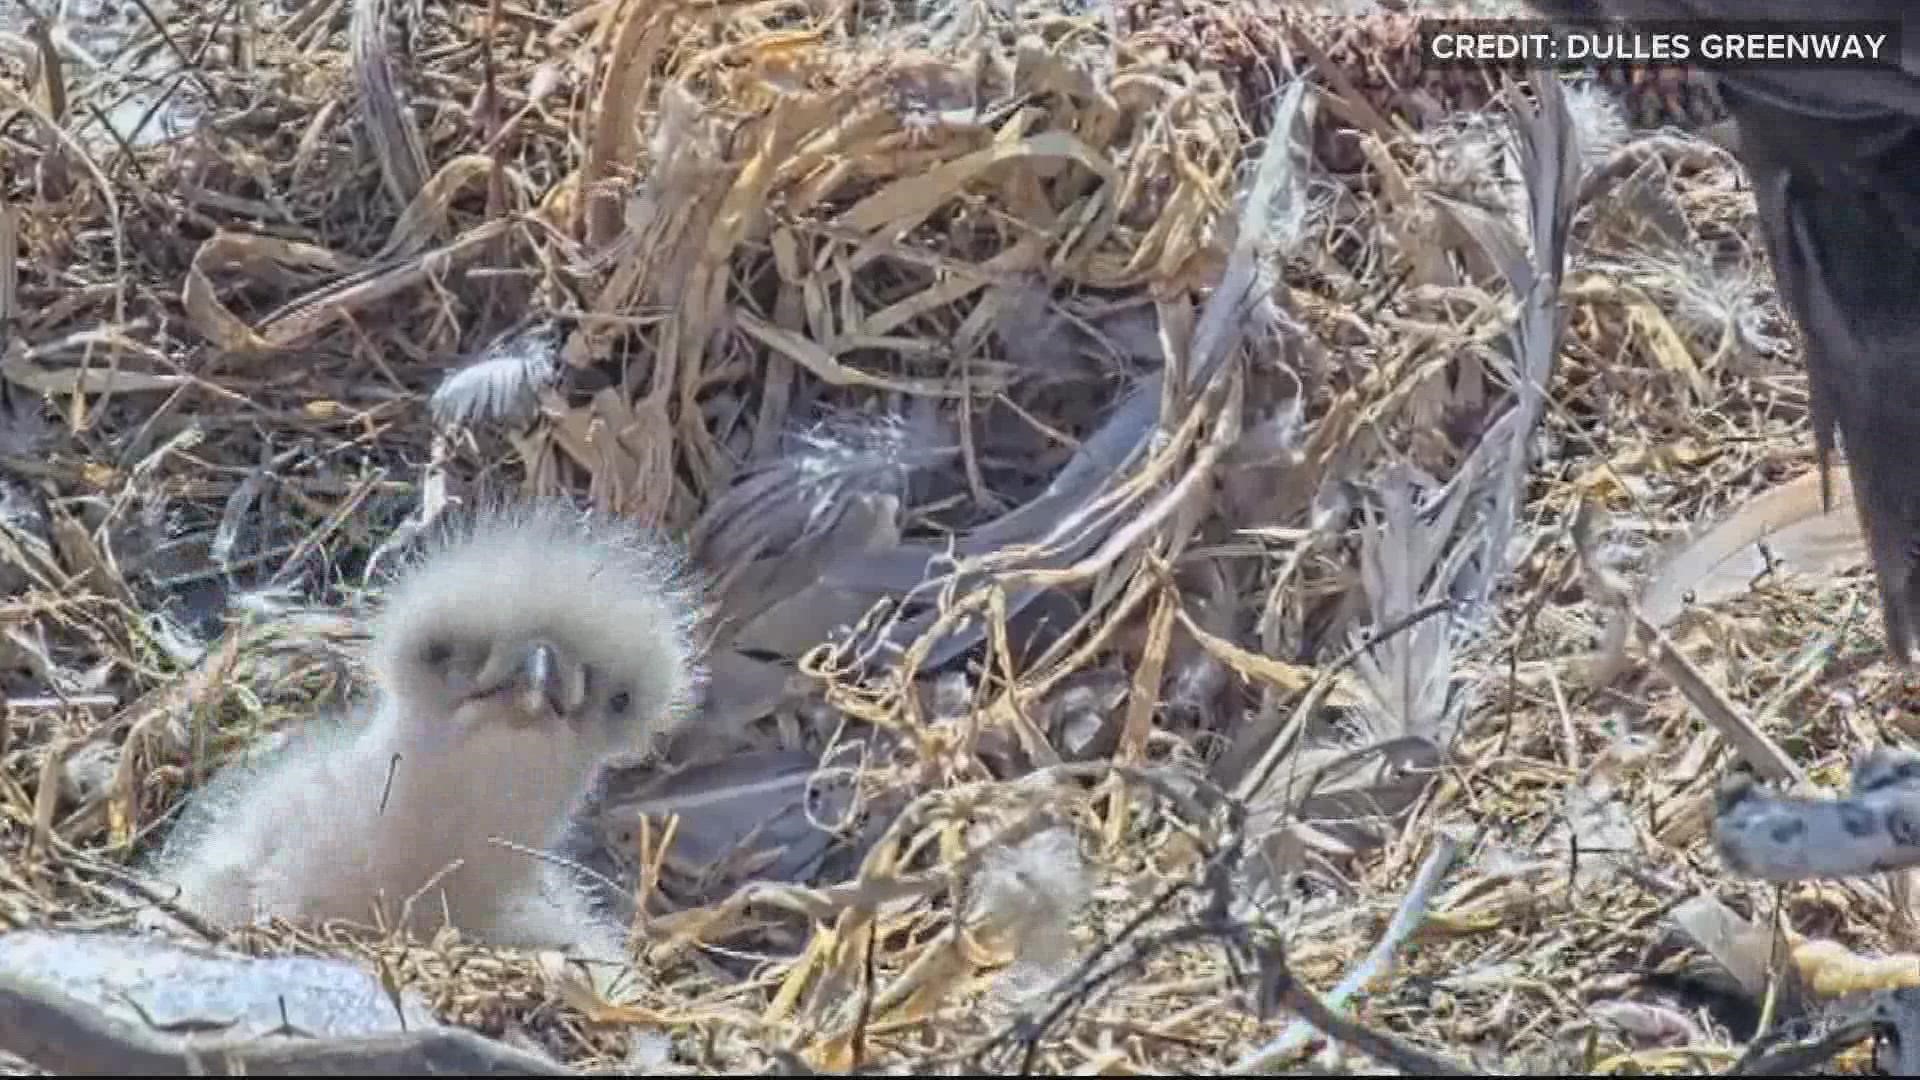 Time is running out to weigh in on a new name for the Dulles Greenway eaglet.